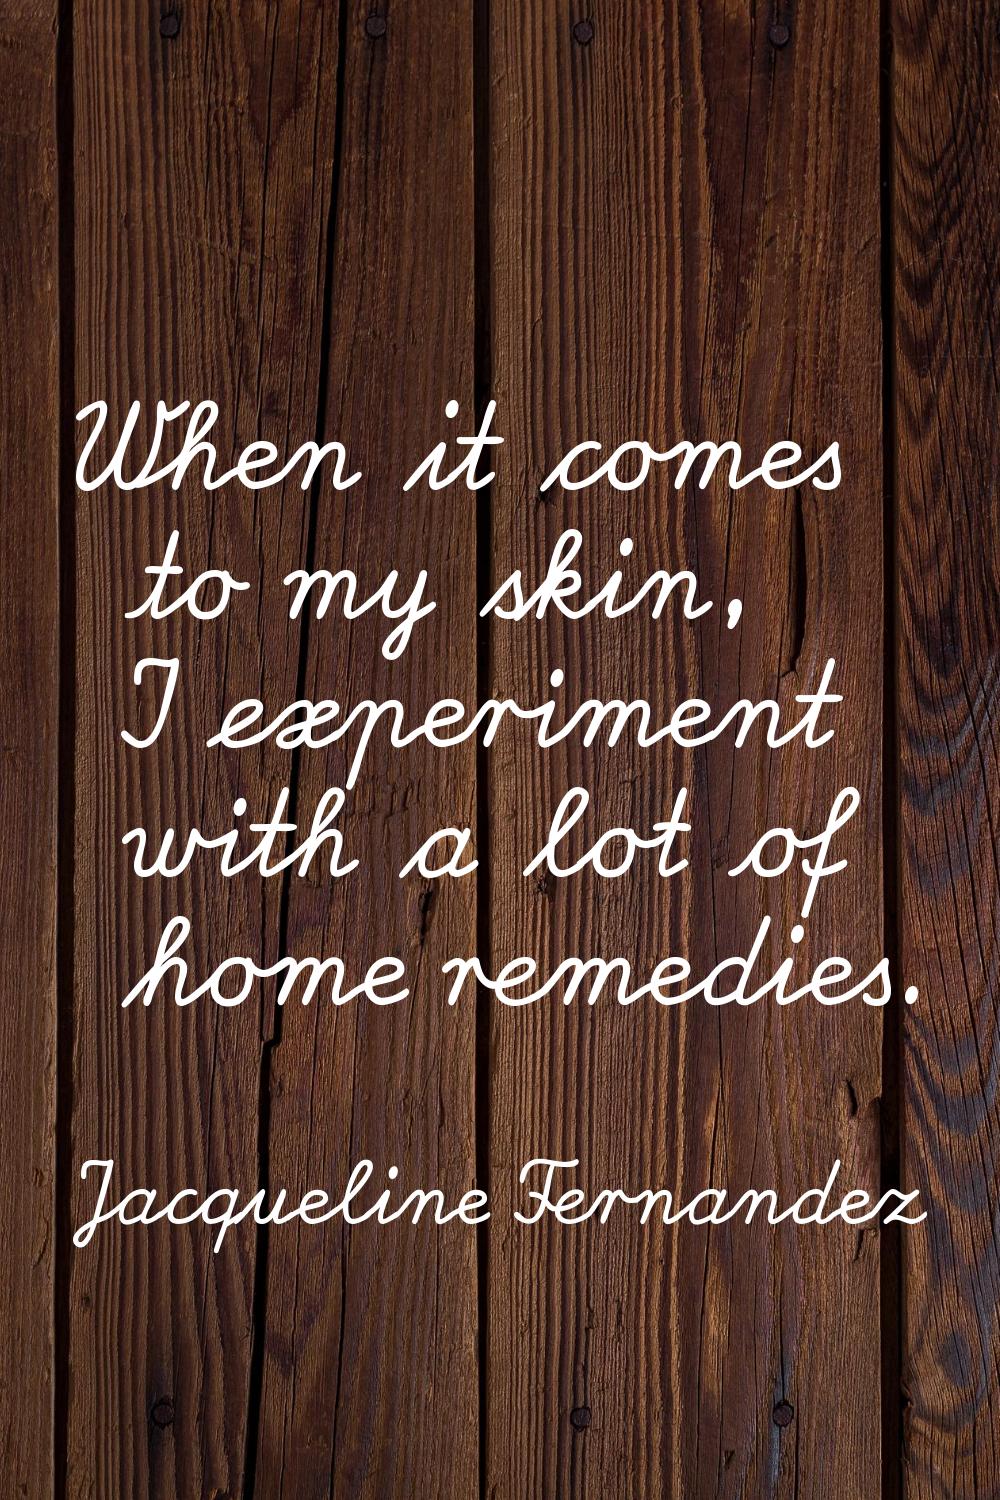 When it comes to my skin, I experiment with a lot of home remedies.